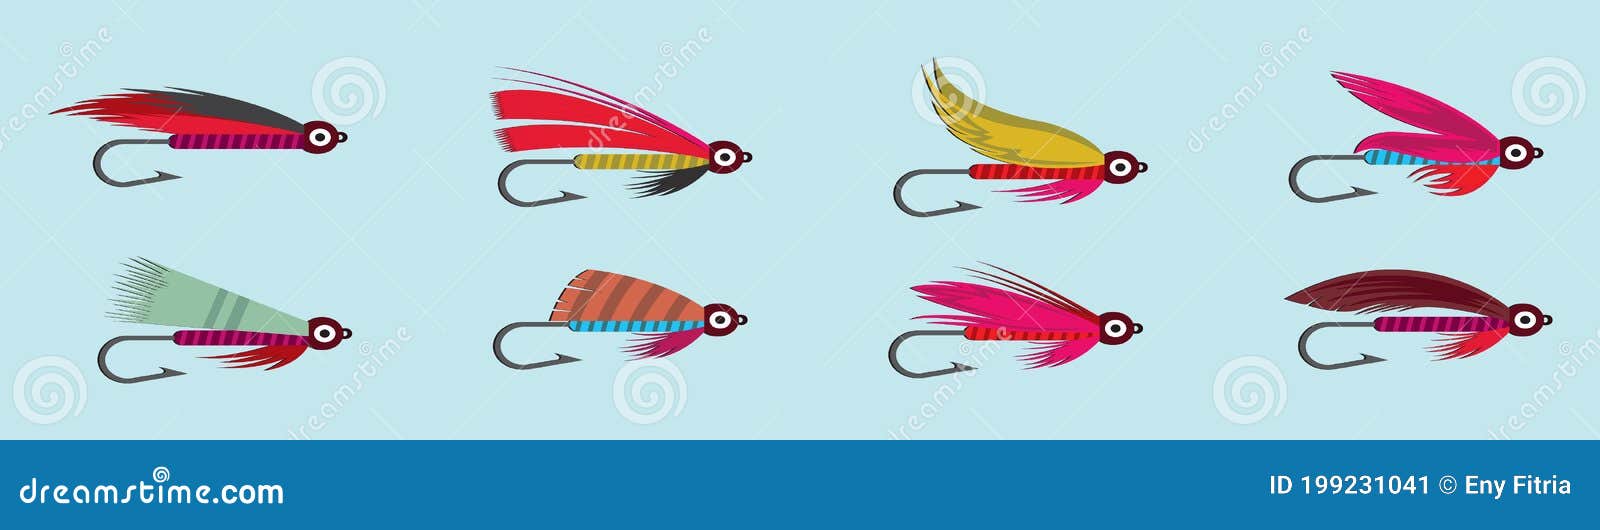 Set of Fly Fishing Flies Cartoon Icon Design Template with Various